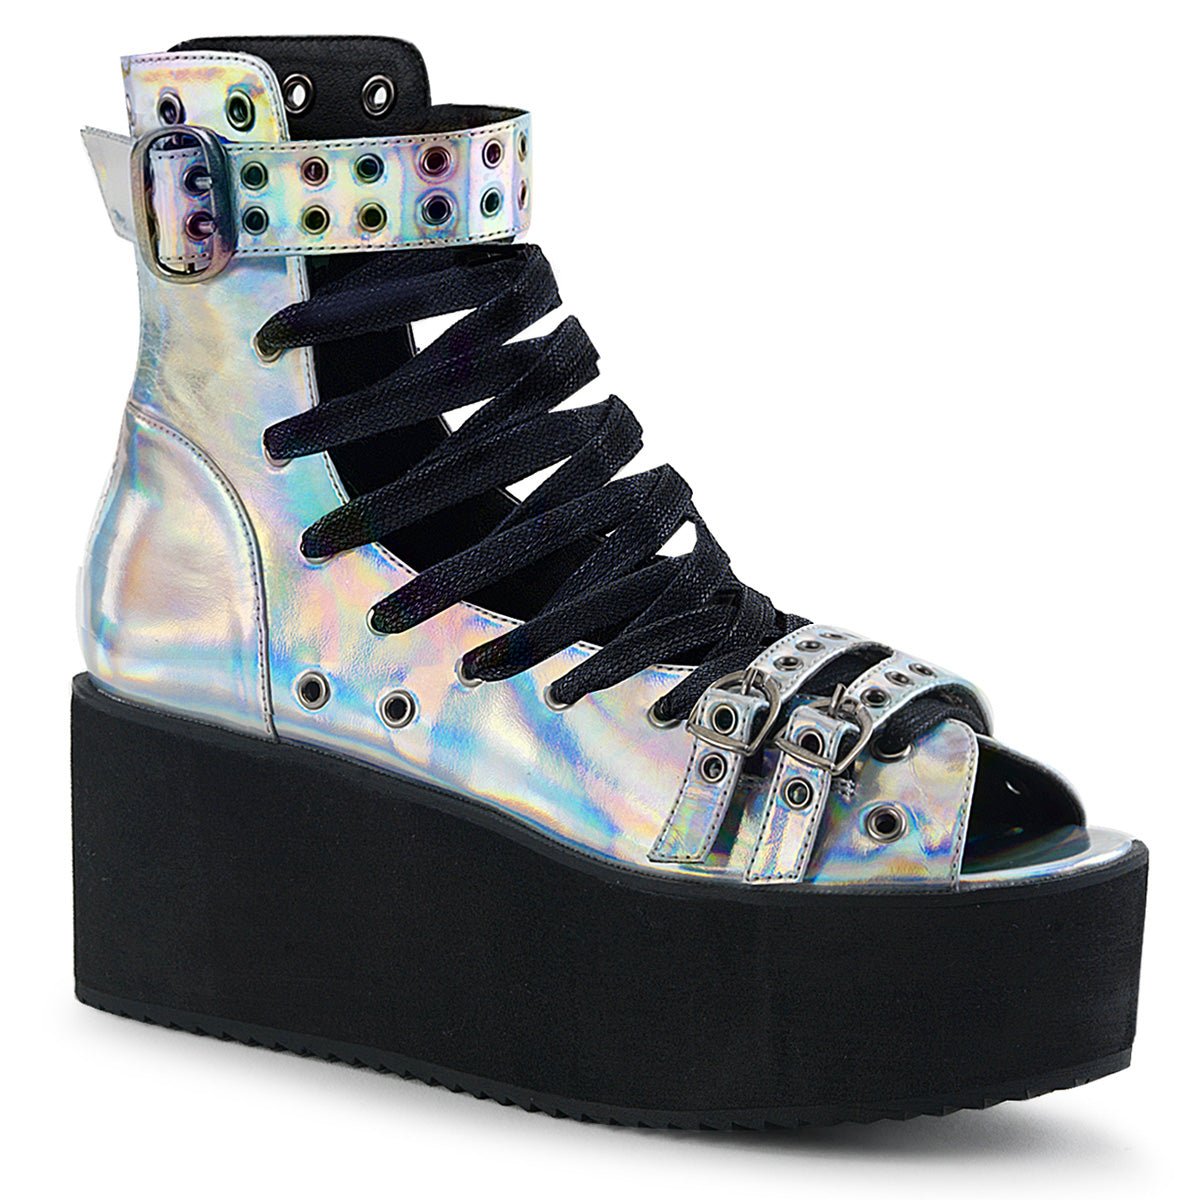 Too Fast | Demonia Grip 105 | Silver Holographic Vegan Leather Women's Sandals